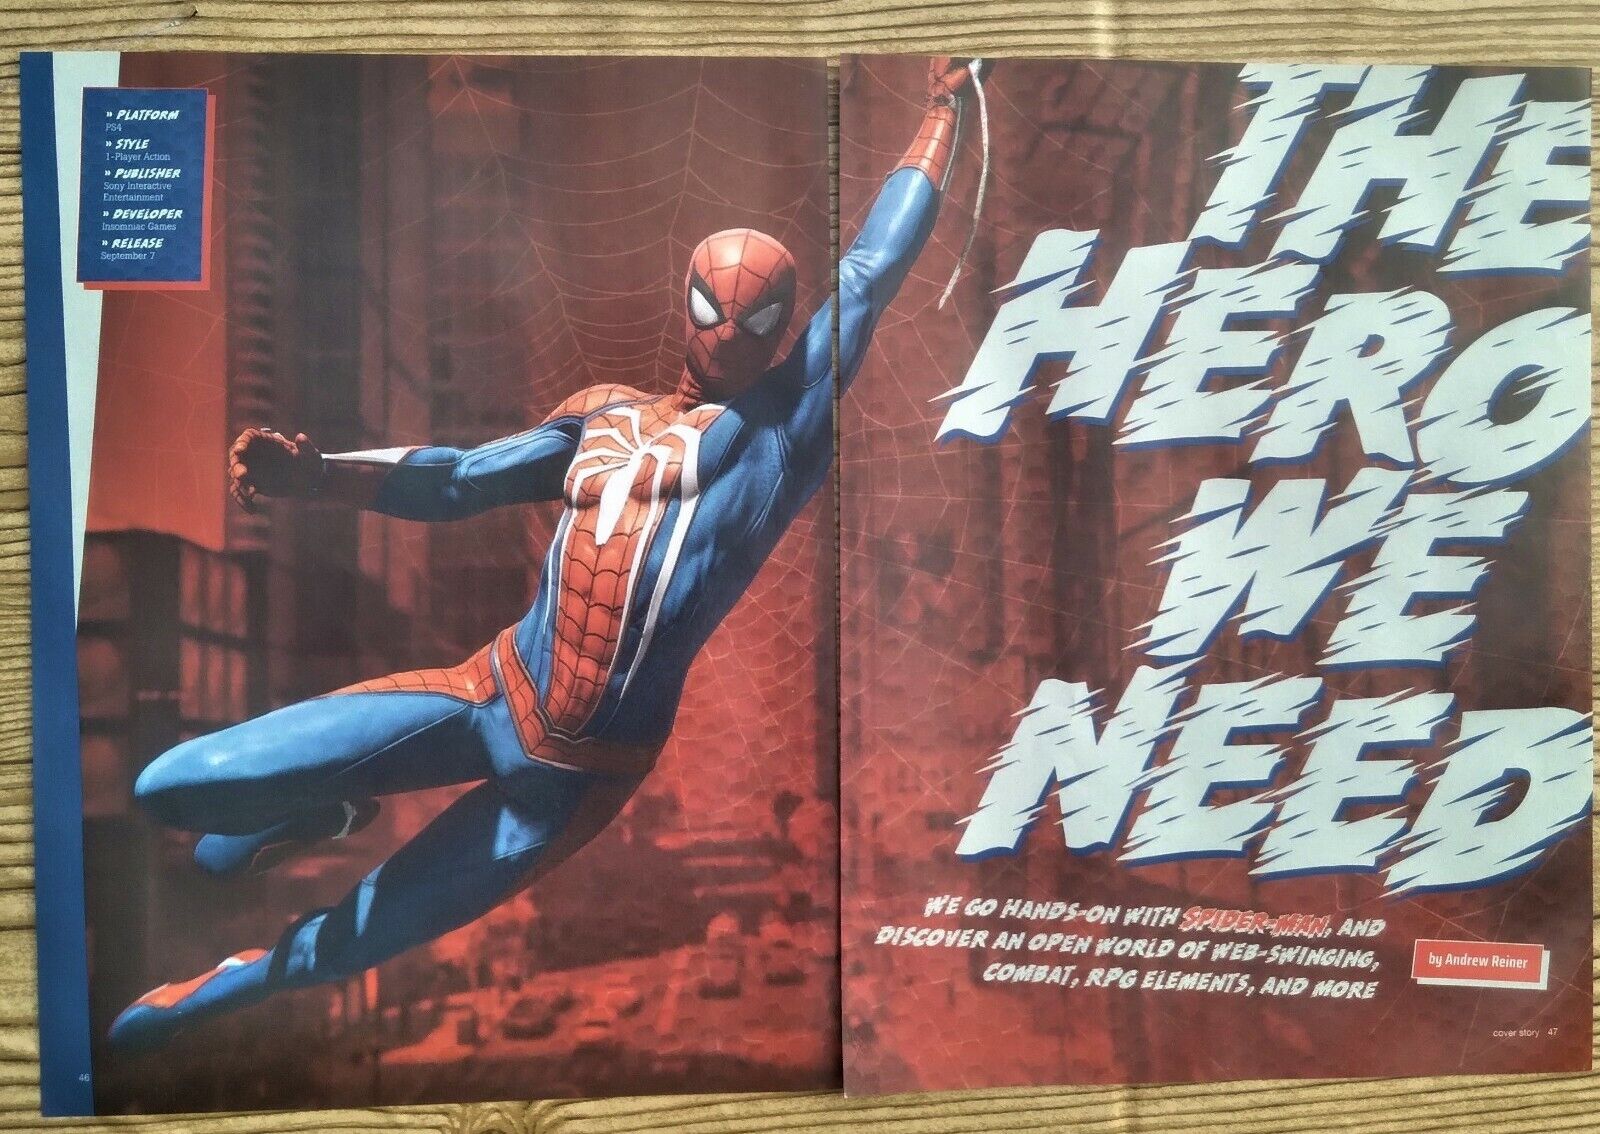 Spiderman The Hero We Need PS4 Promo Art 2017 Video Game Print Ad Poster 